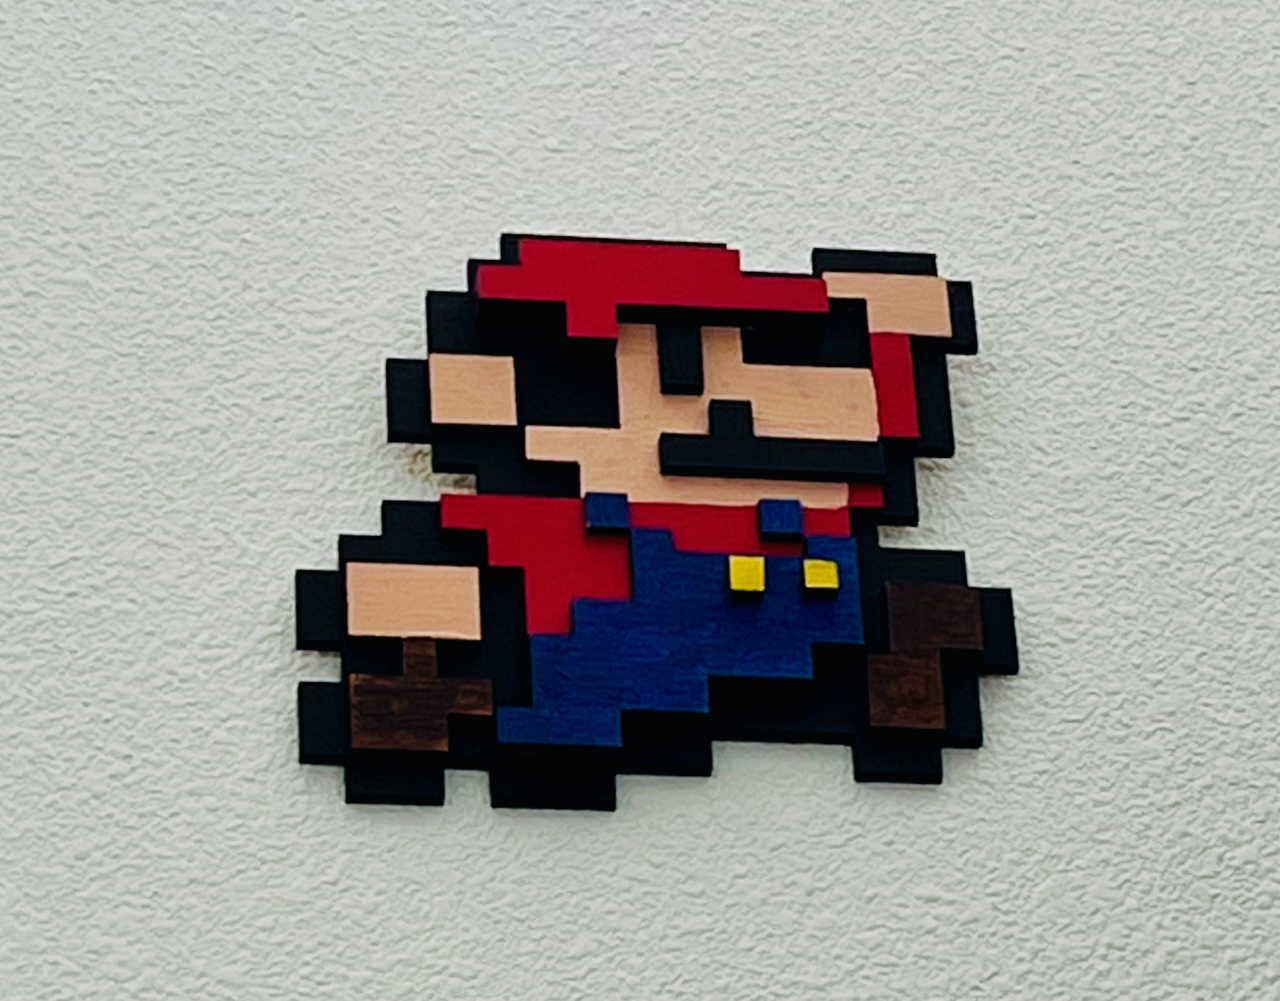 Mario hanging on the wall